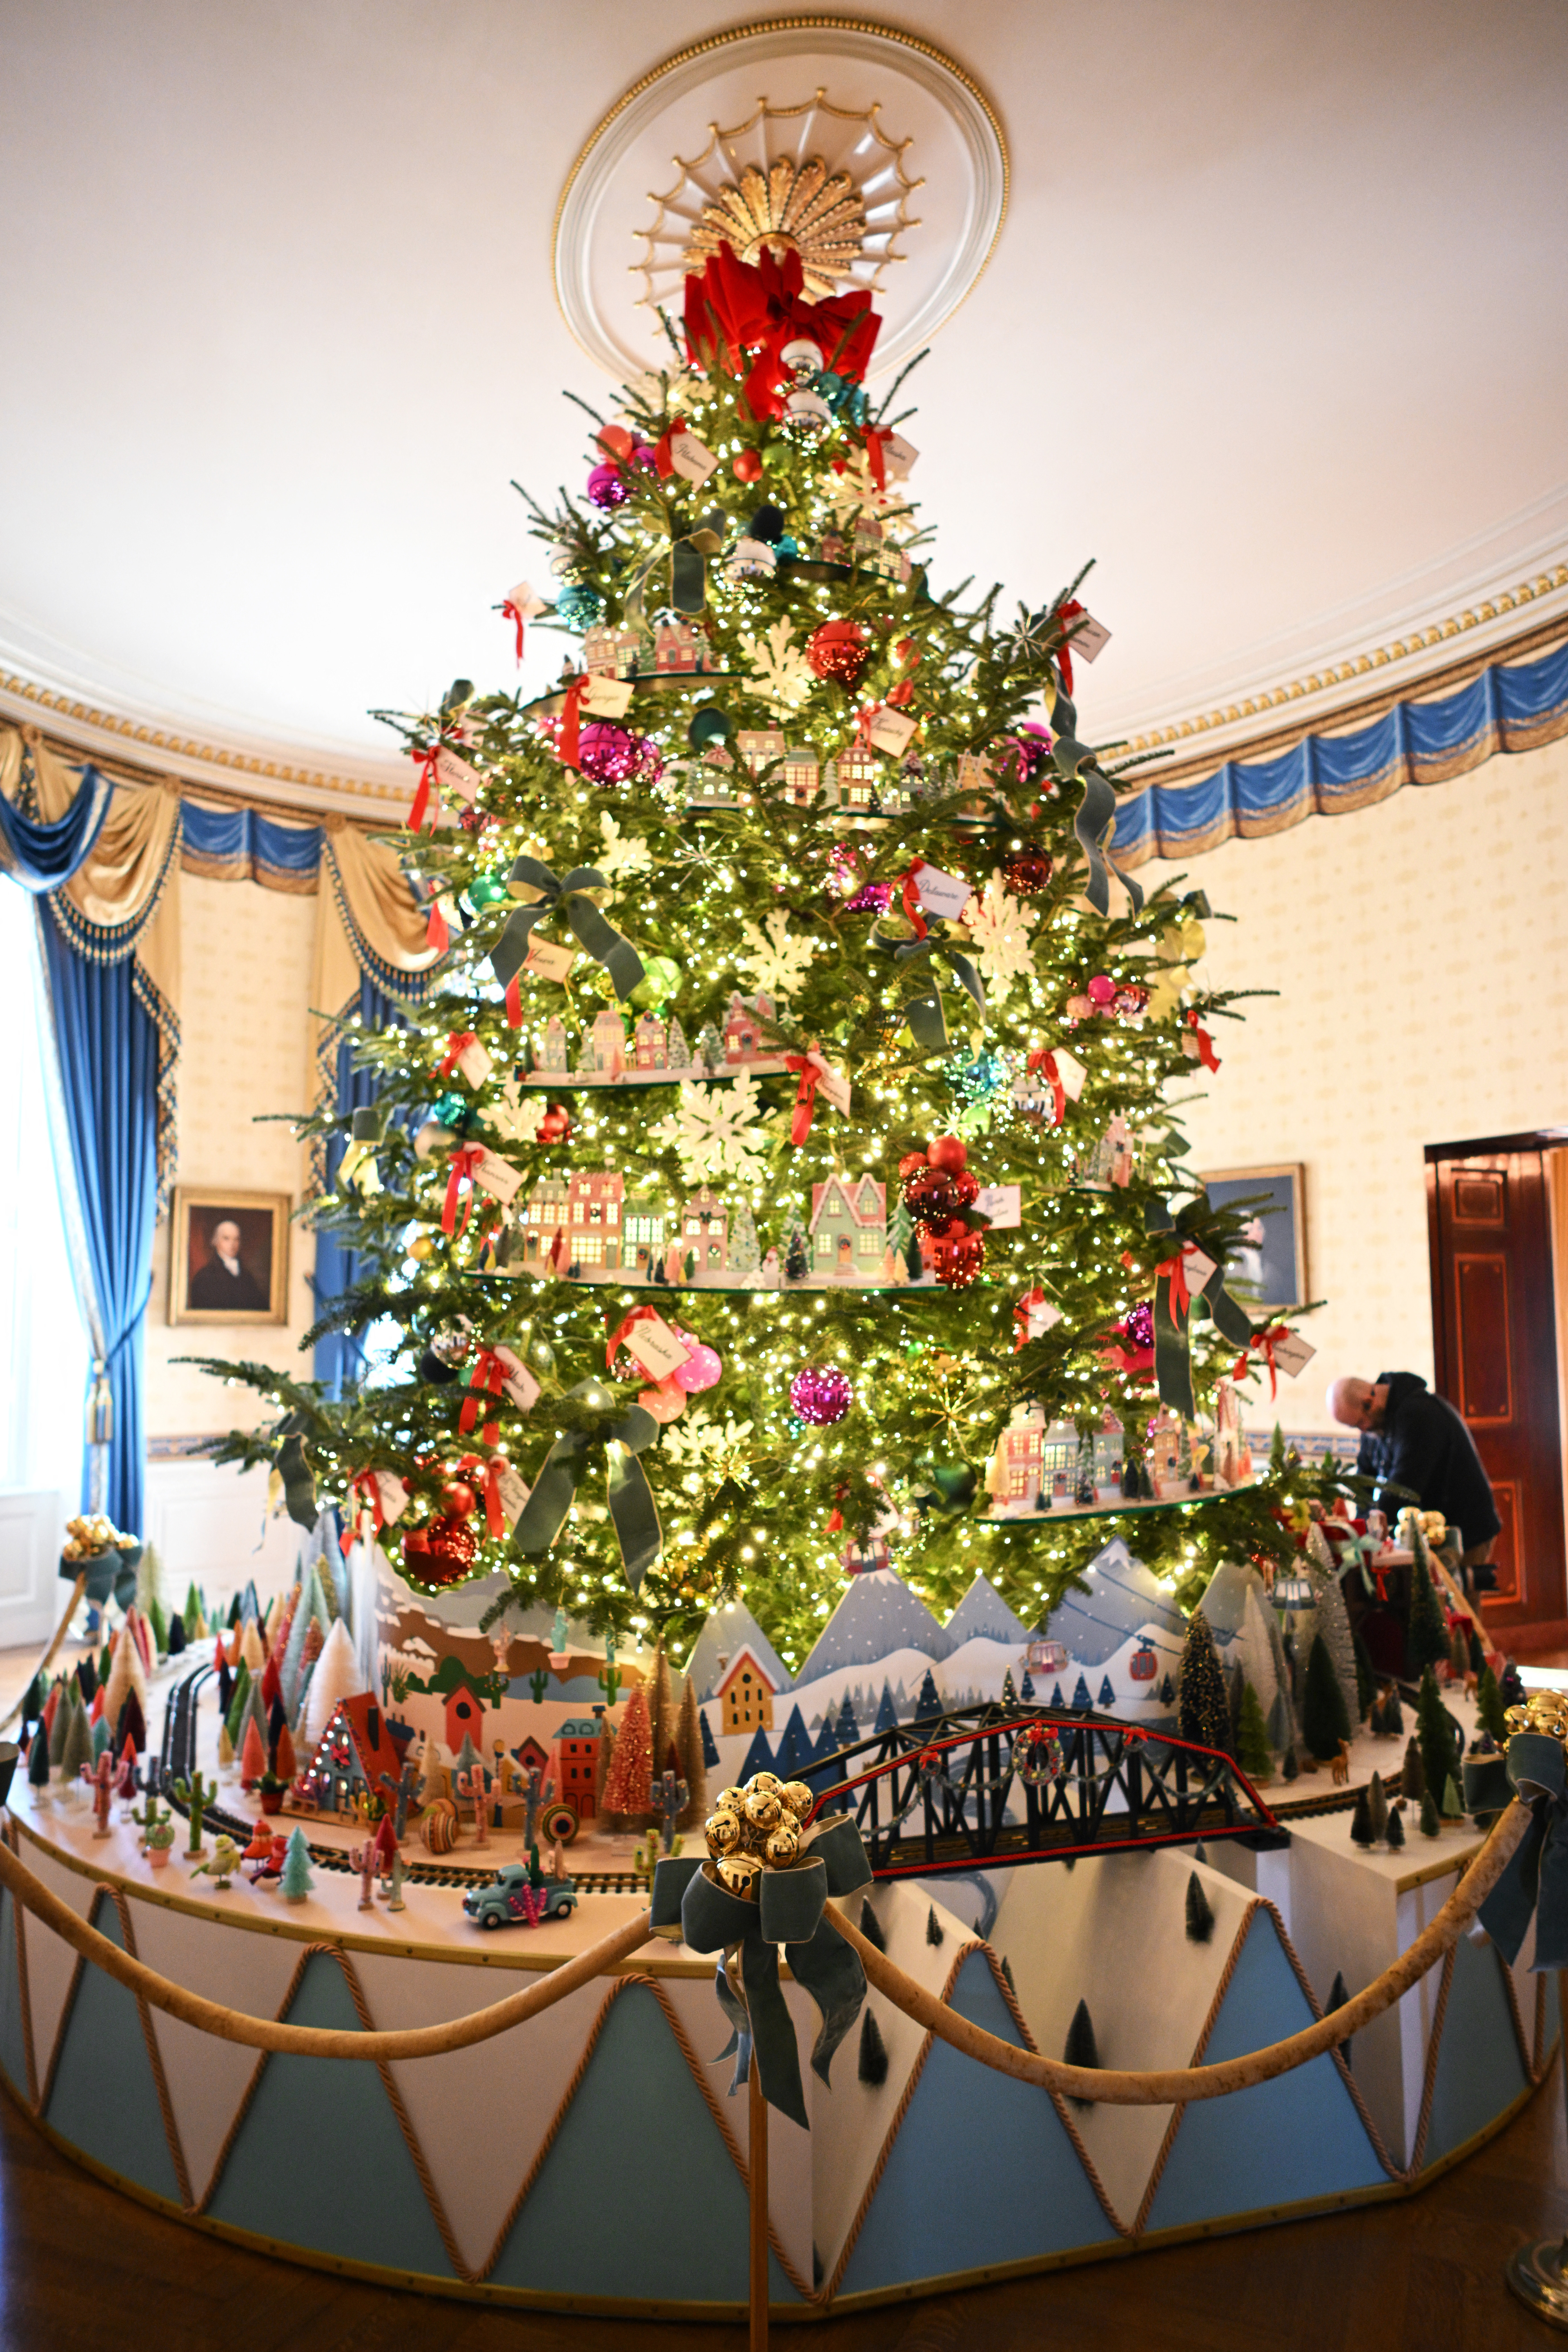 A Christmas tree in the White House